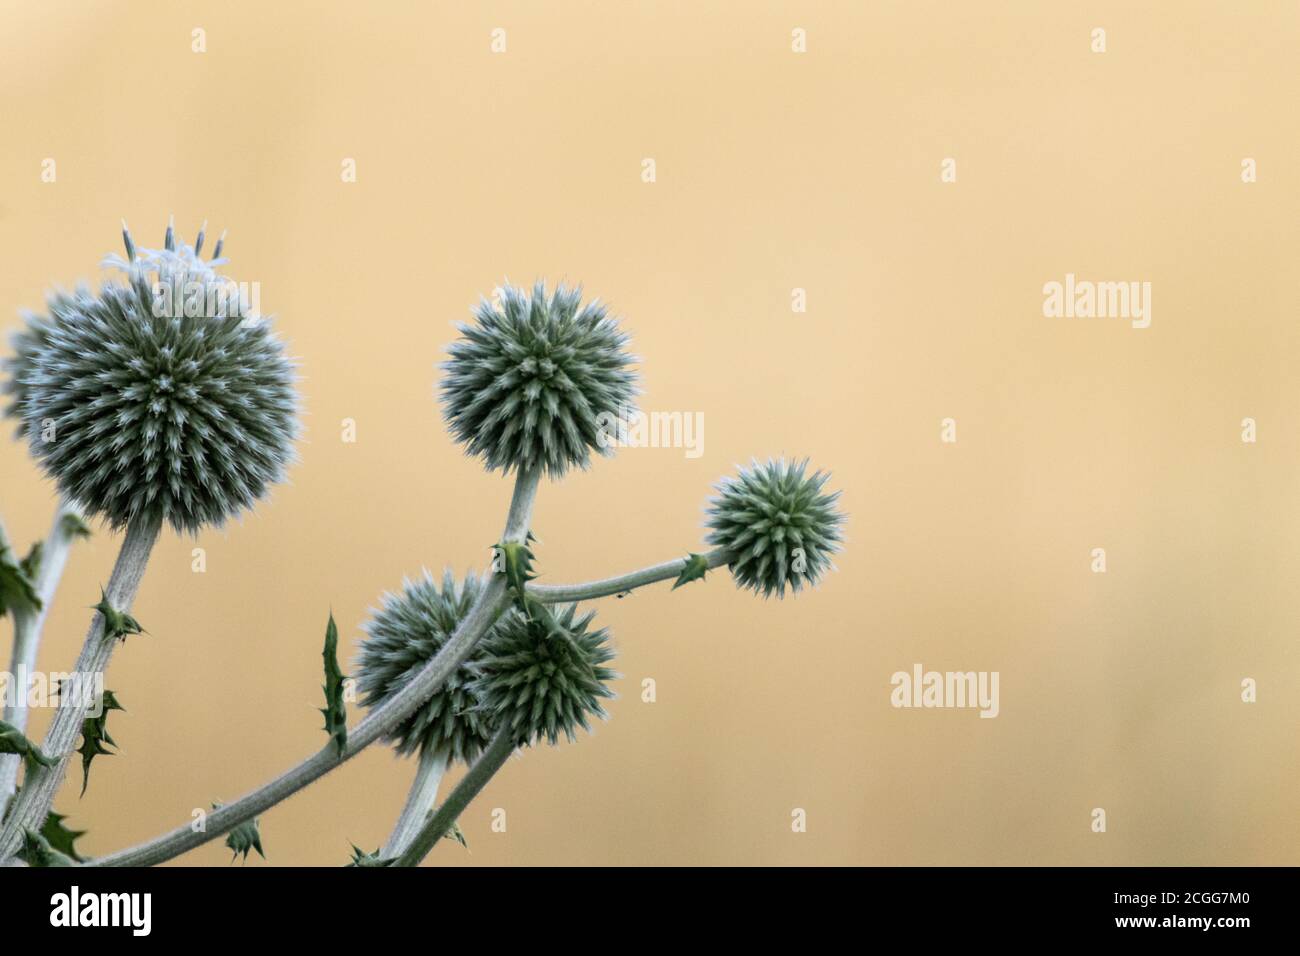 Globe thistle round-shaped green flowers macro. Echinops ritro wild prickly grass on blurred beige yellow background. Copy space natural modern detail Stock Photo